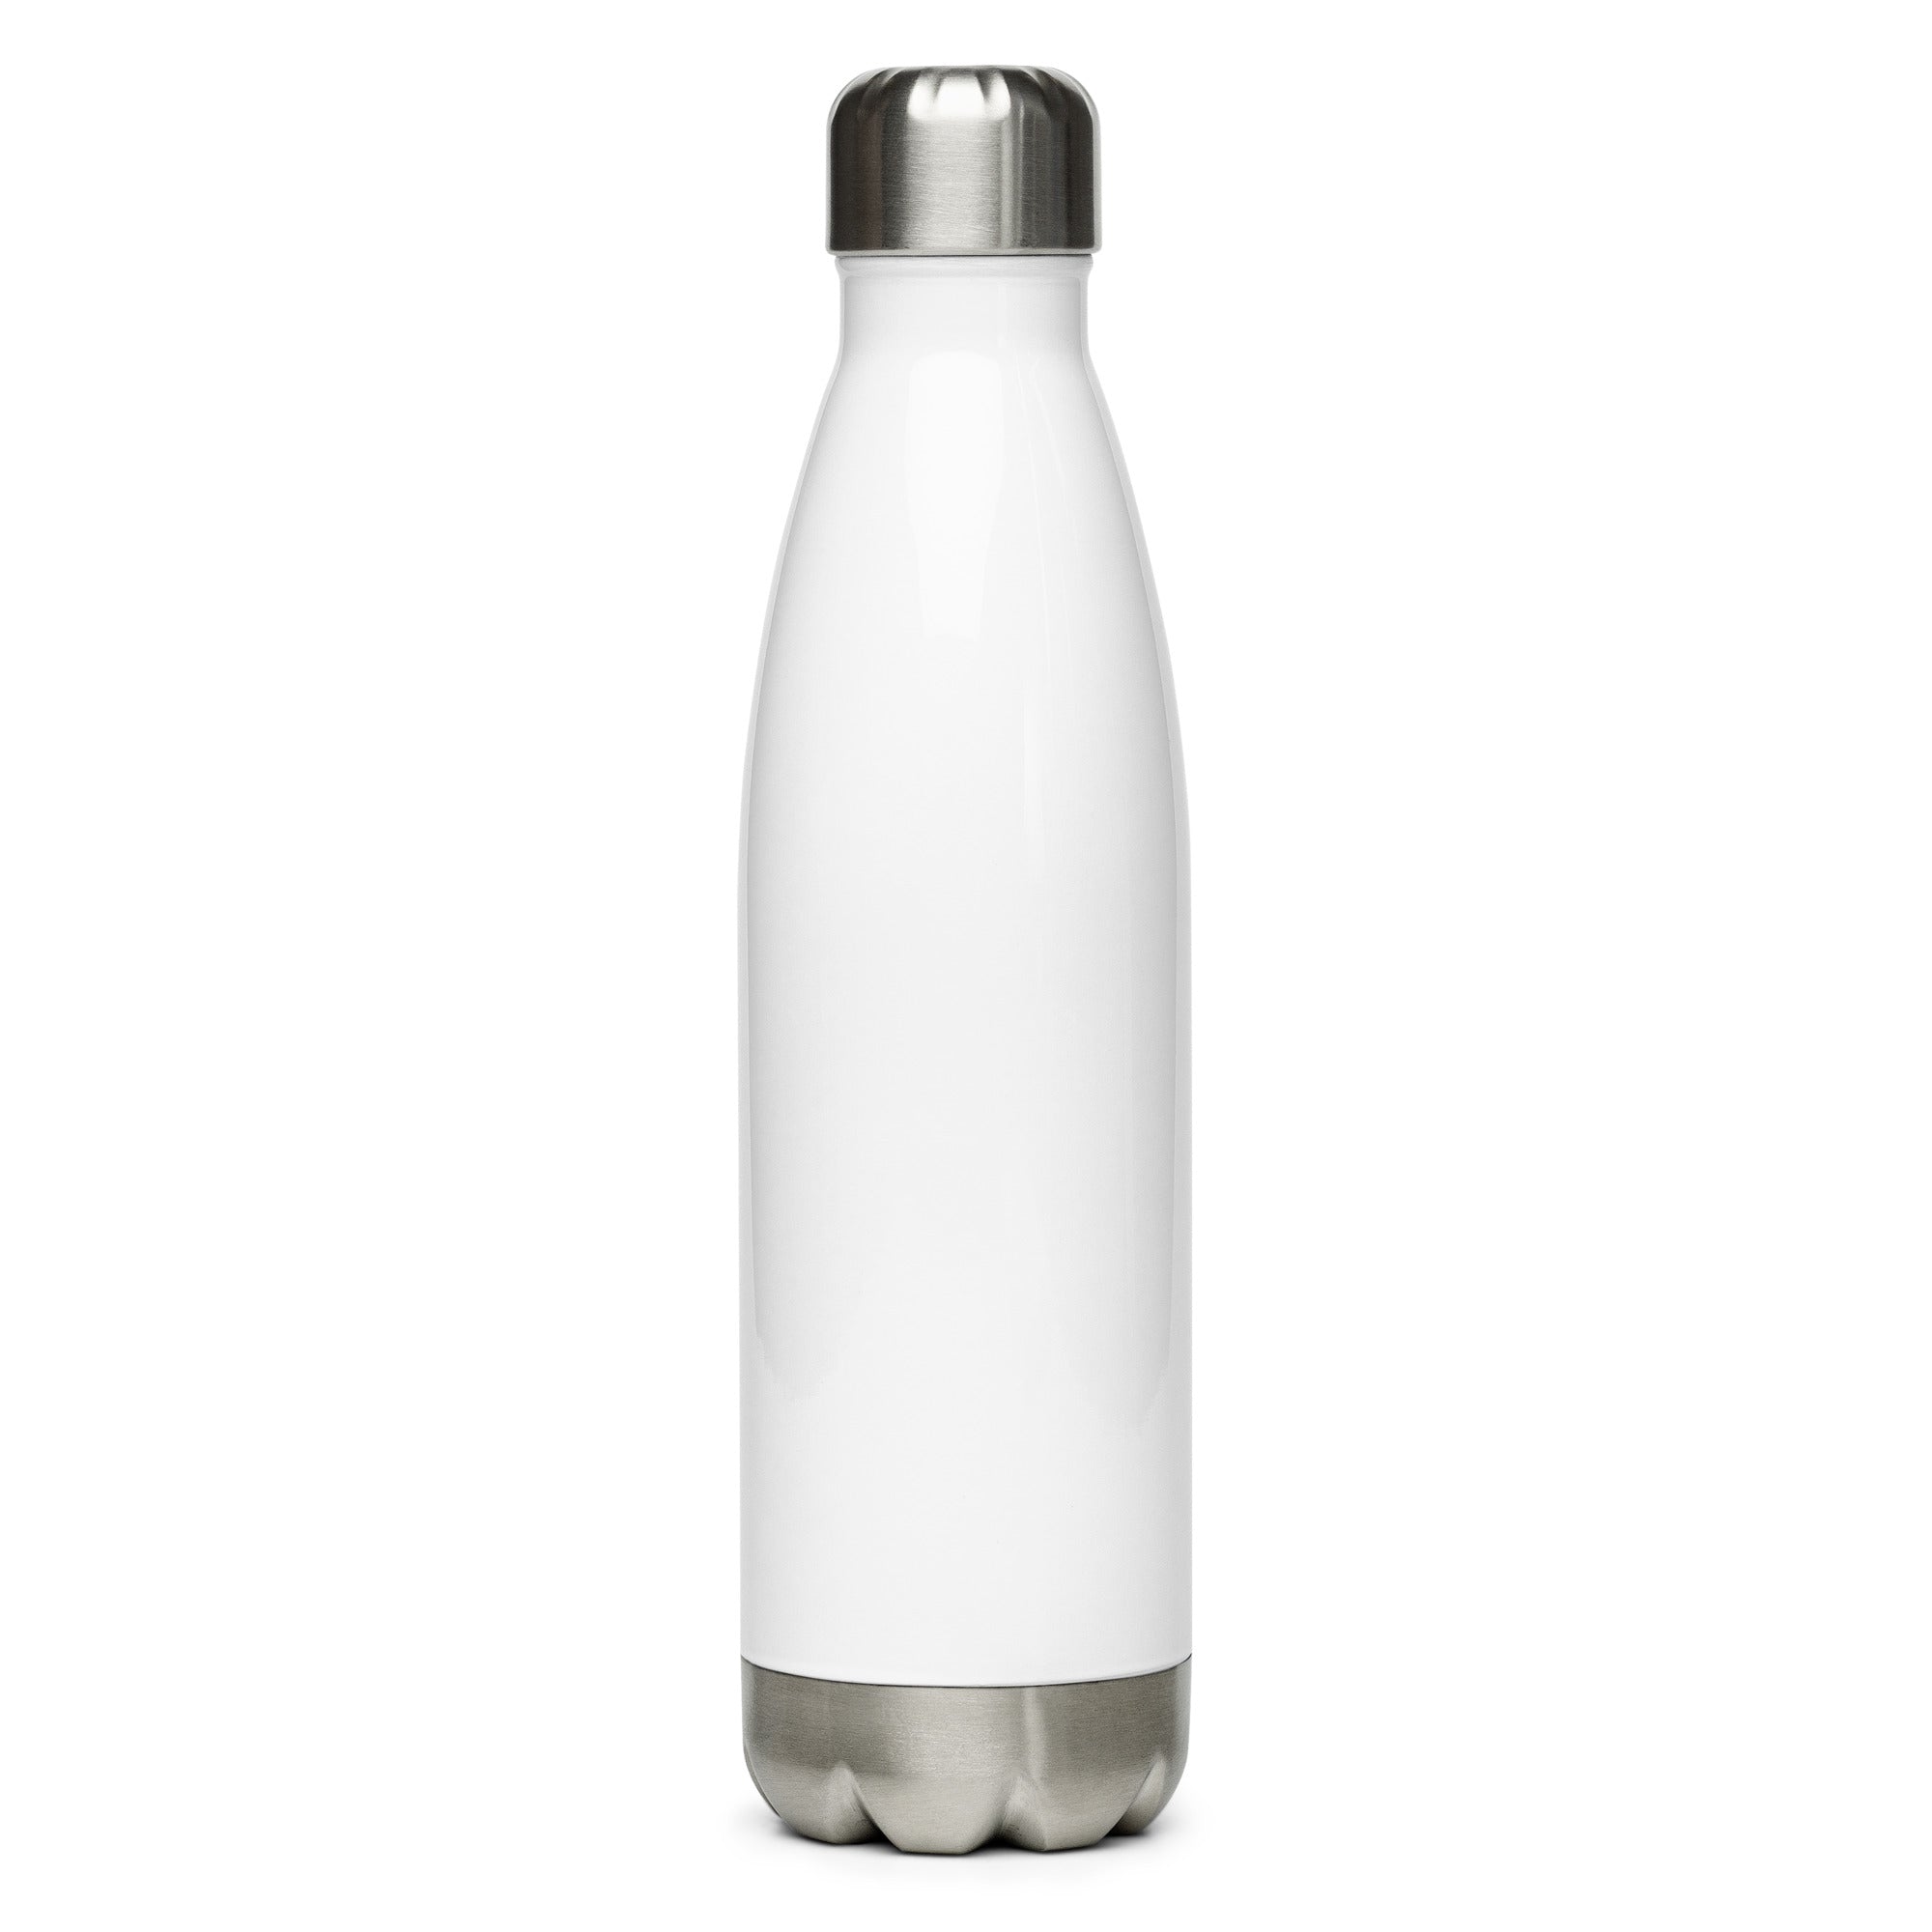 IEW Stainless Steel Water Bottle